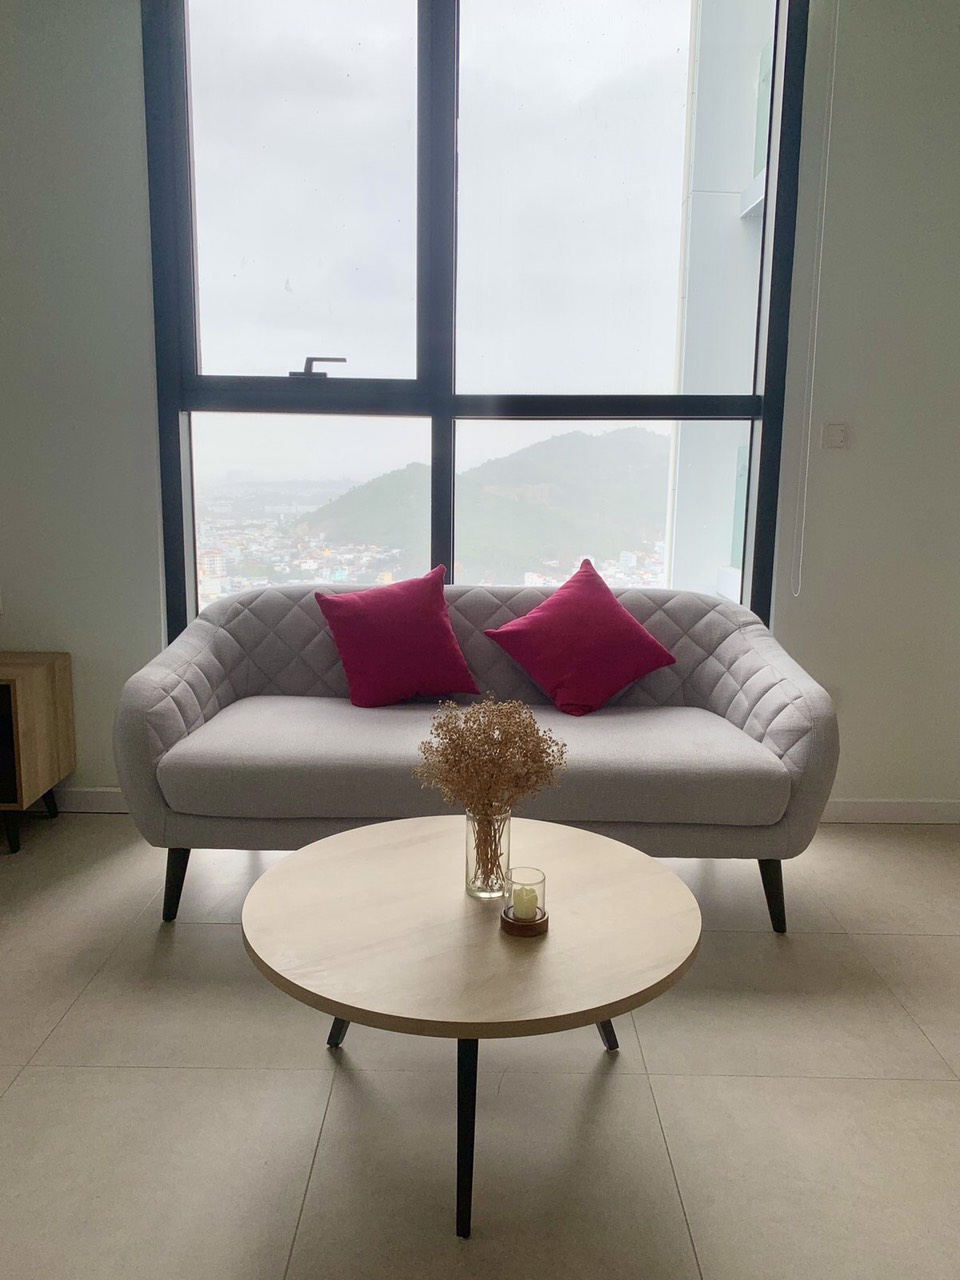 Scenia Bay Nha Trang for rent | One bedroom plus | 12 million VND